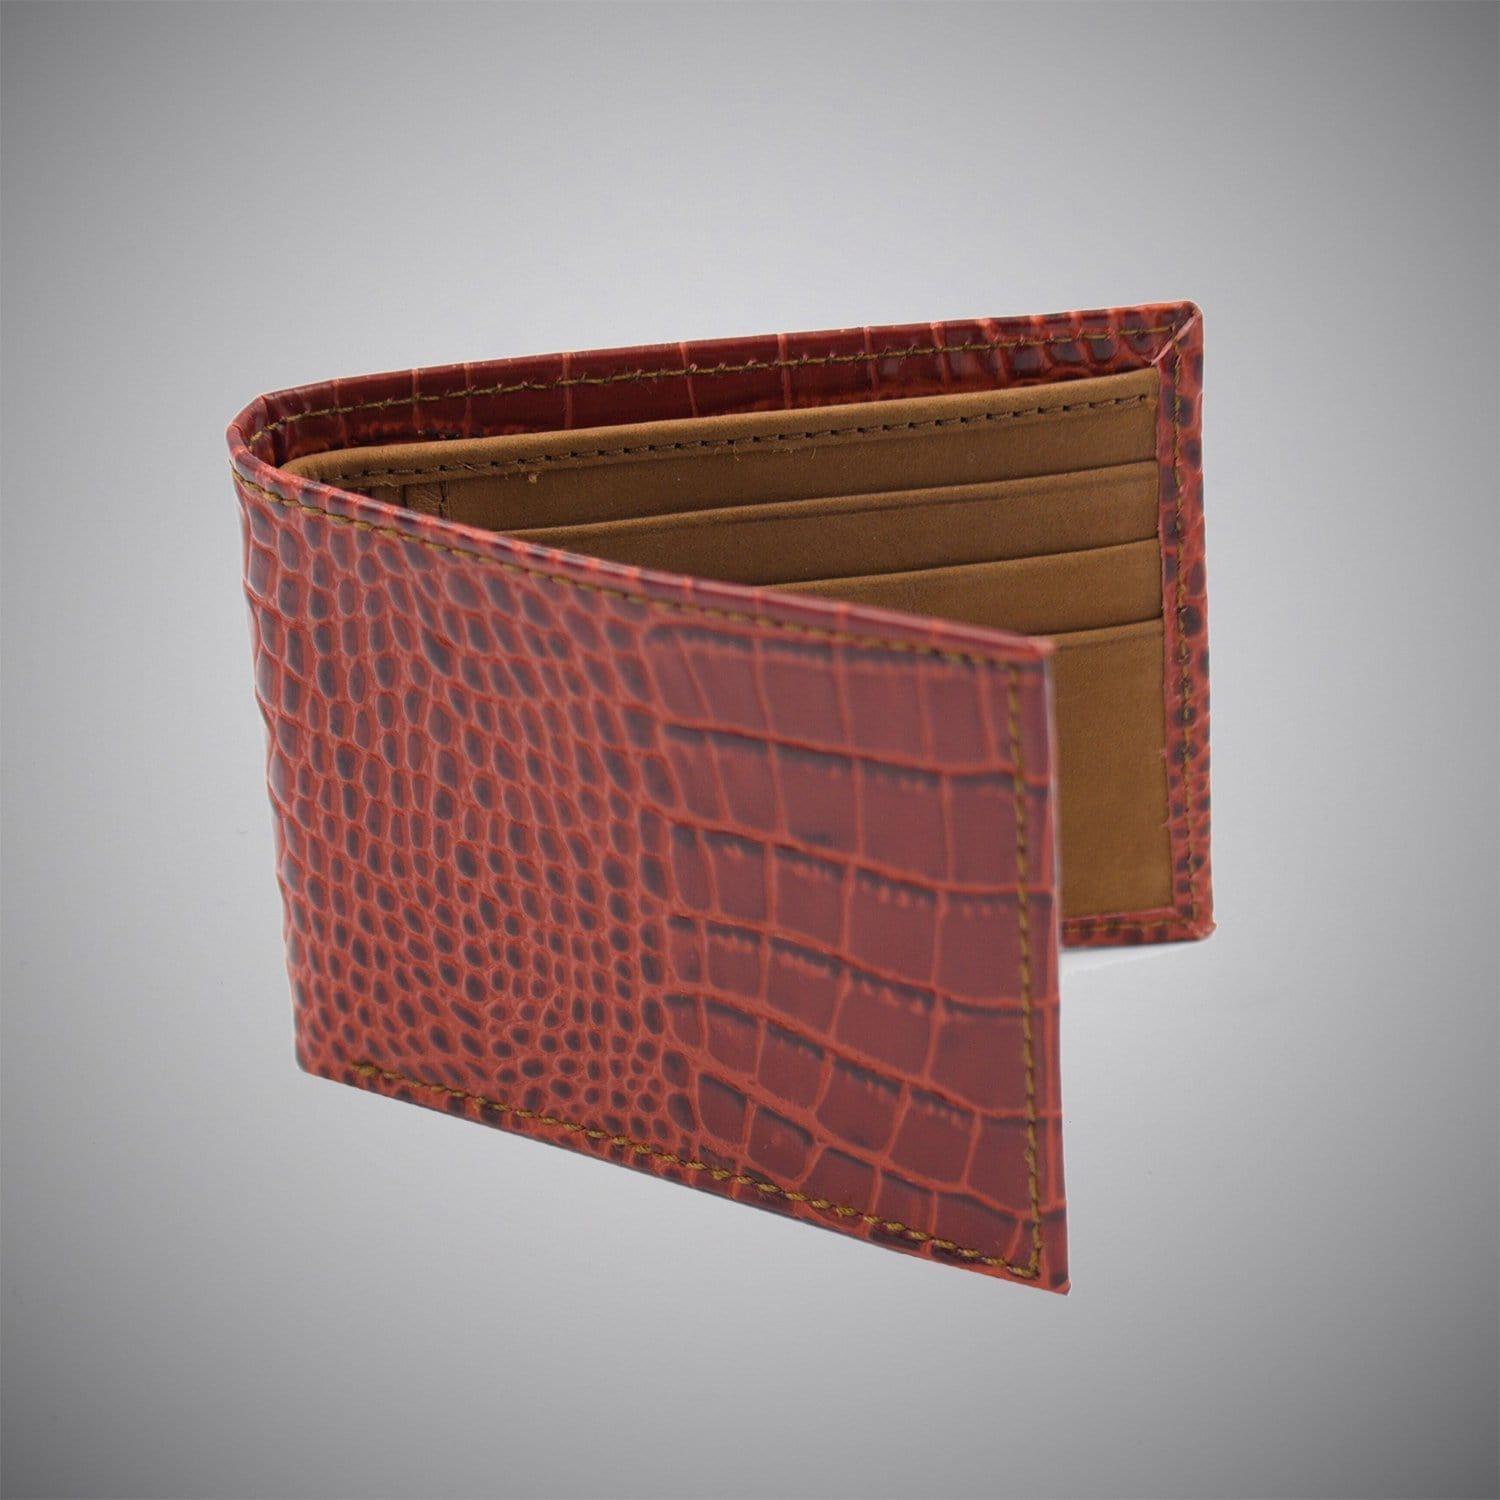 Oxblood Crocodile Embossed Calf Leather Wallet With Tan Suede Interior - Just White Shirts